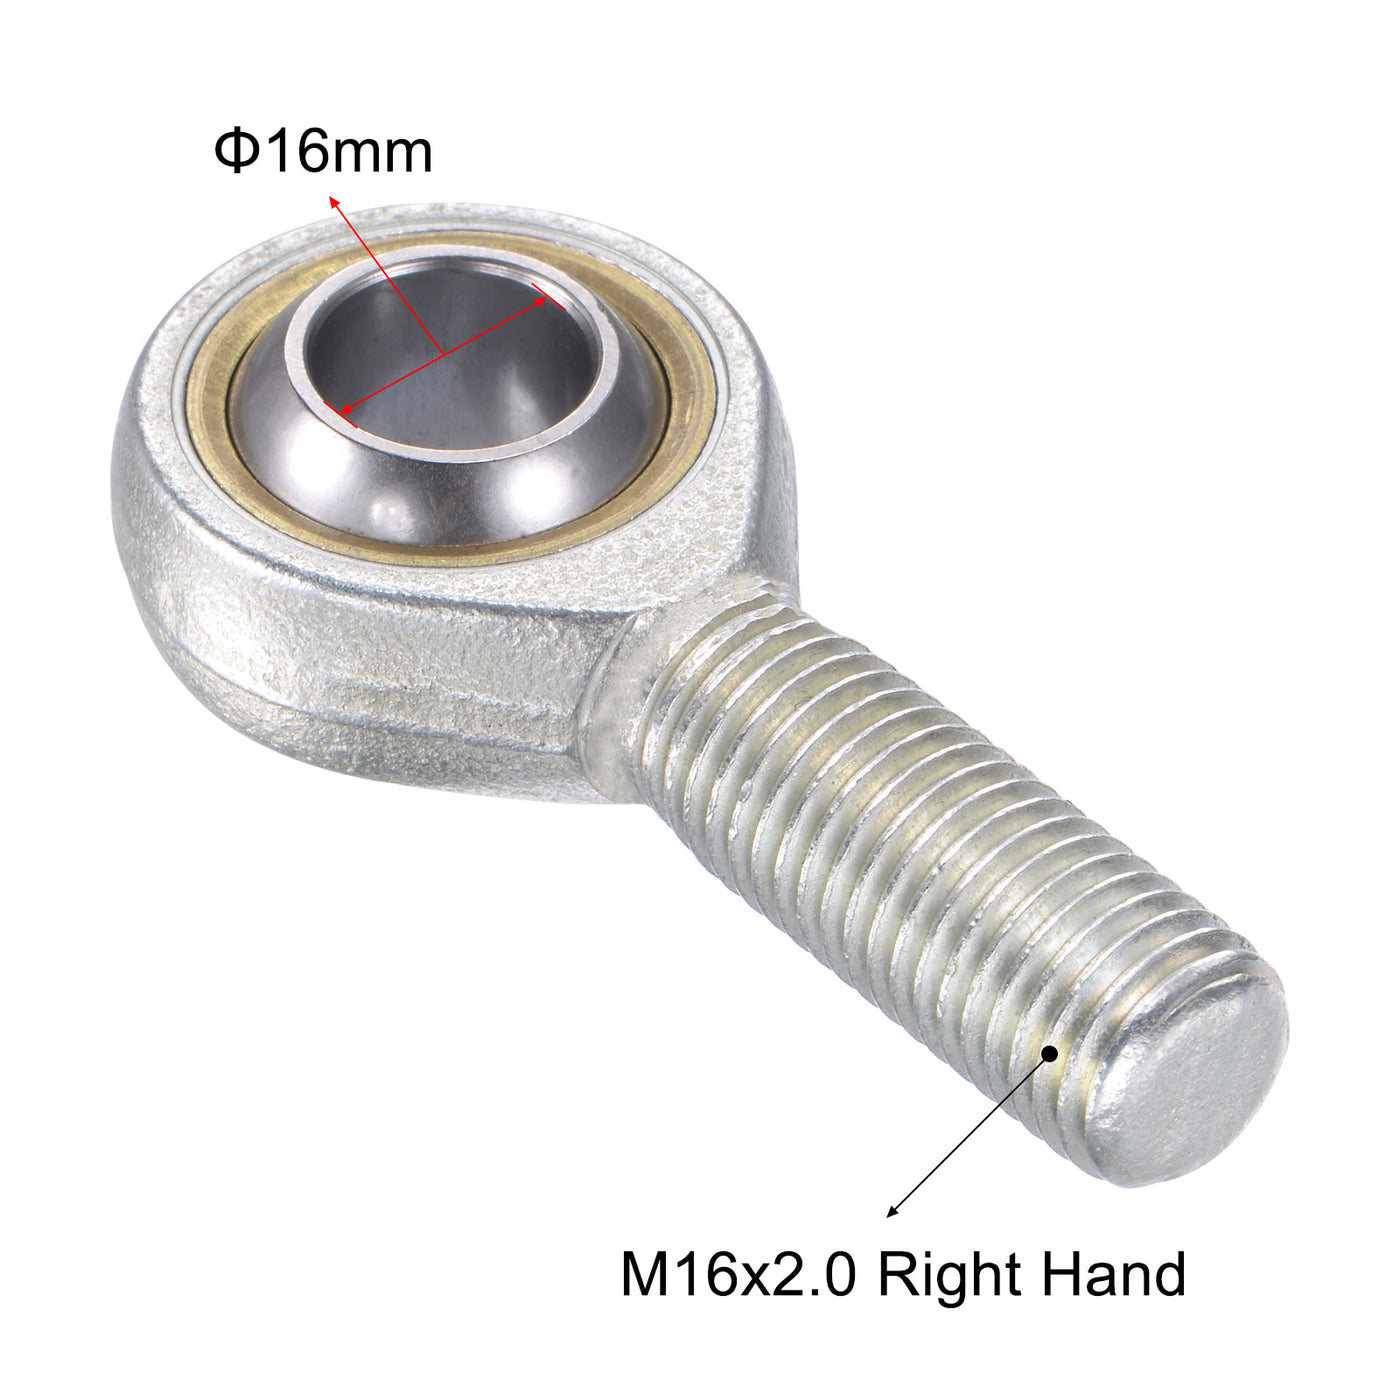 uxcell Uxcell SA16TK POSA16 Rod End Bearing 16mm Bore M16x2.0 Right Hand Male Thread